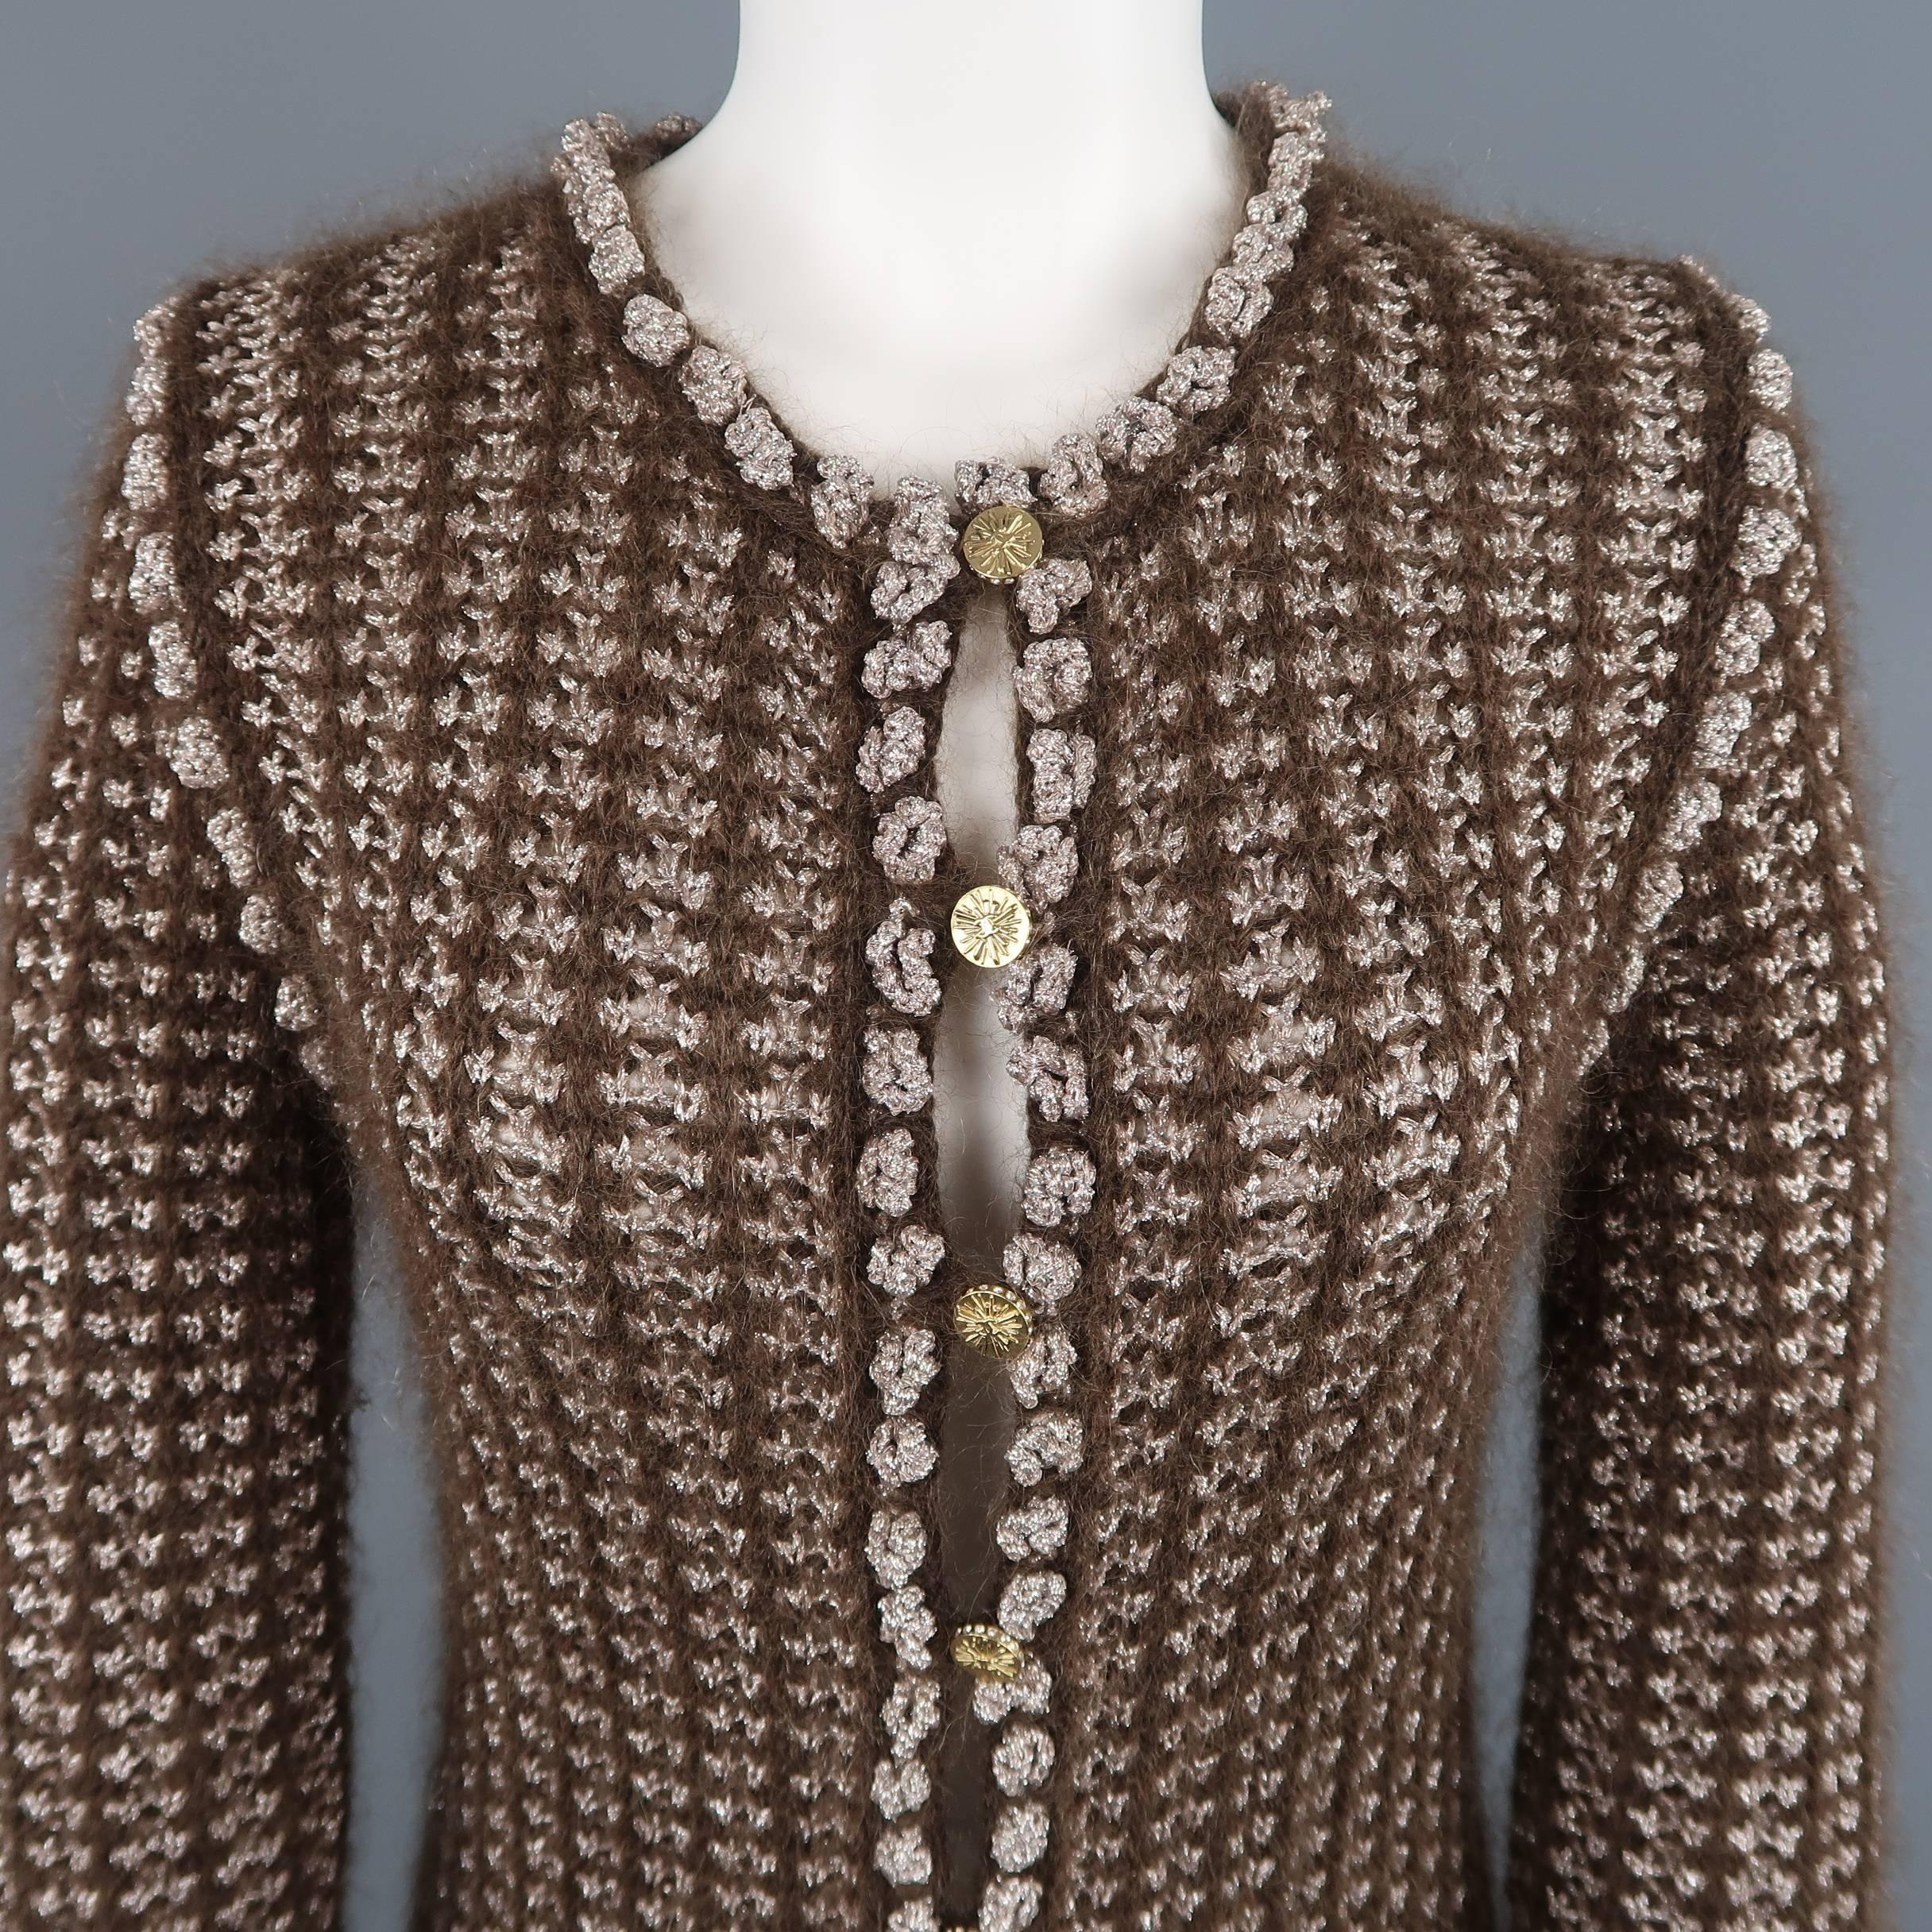 CHANEL Fall Winter 2004 Collection long cardigan comes in brown and silver mohair lurex textured knit with a round collar, patch pockets, lace trim, and gold tone rhinestone buttons. Label removed. As-is.
 
Good Pre-Owned Condition.
Marked: (no